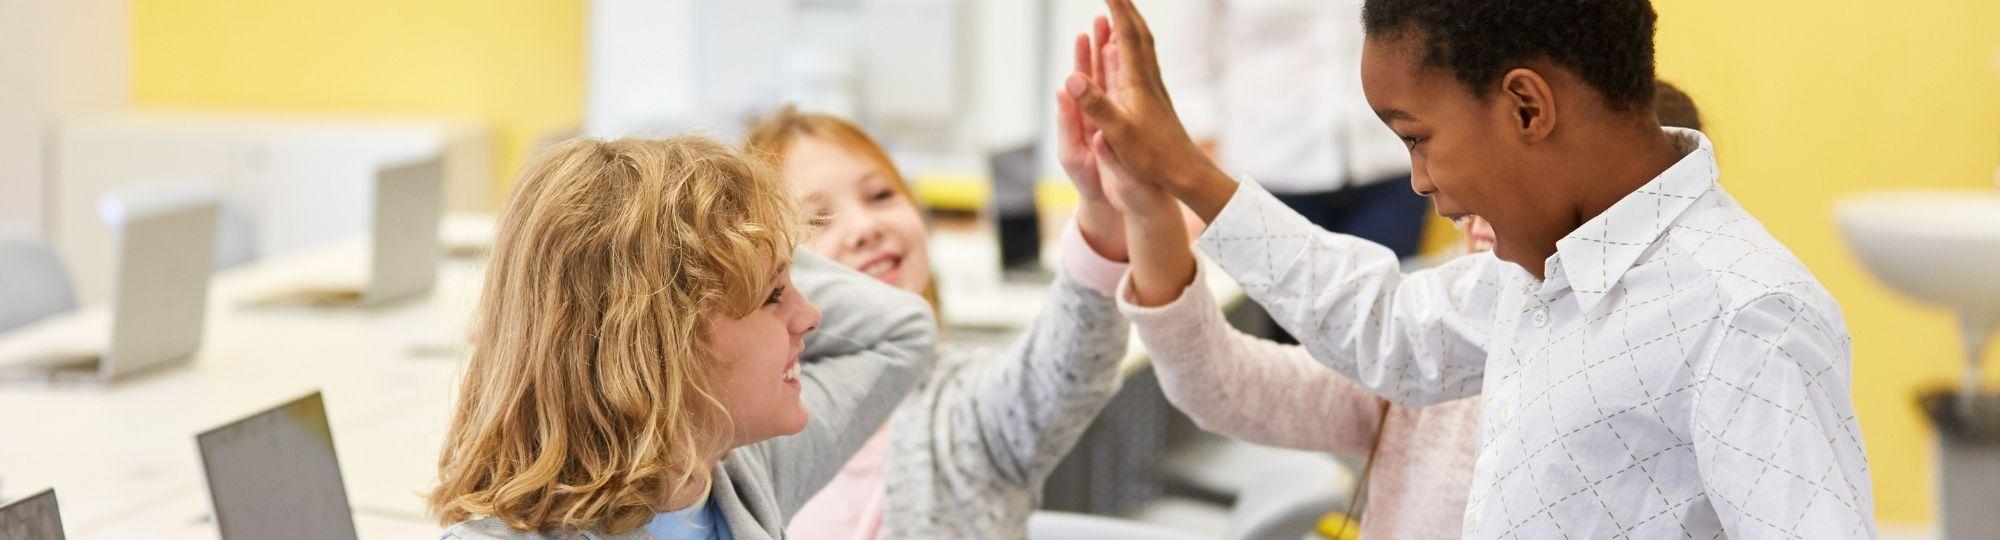 Kids display good positive behavior with a high five in classroom.